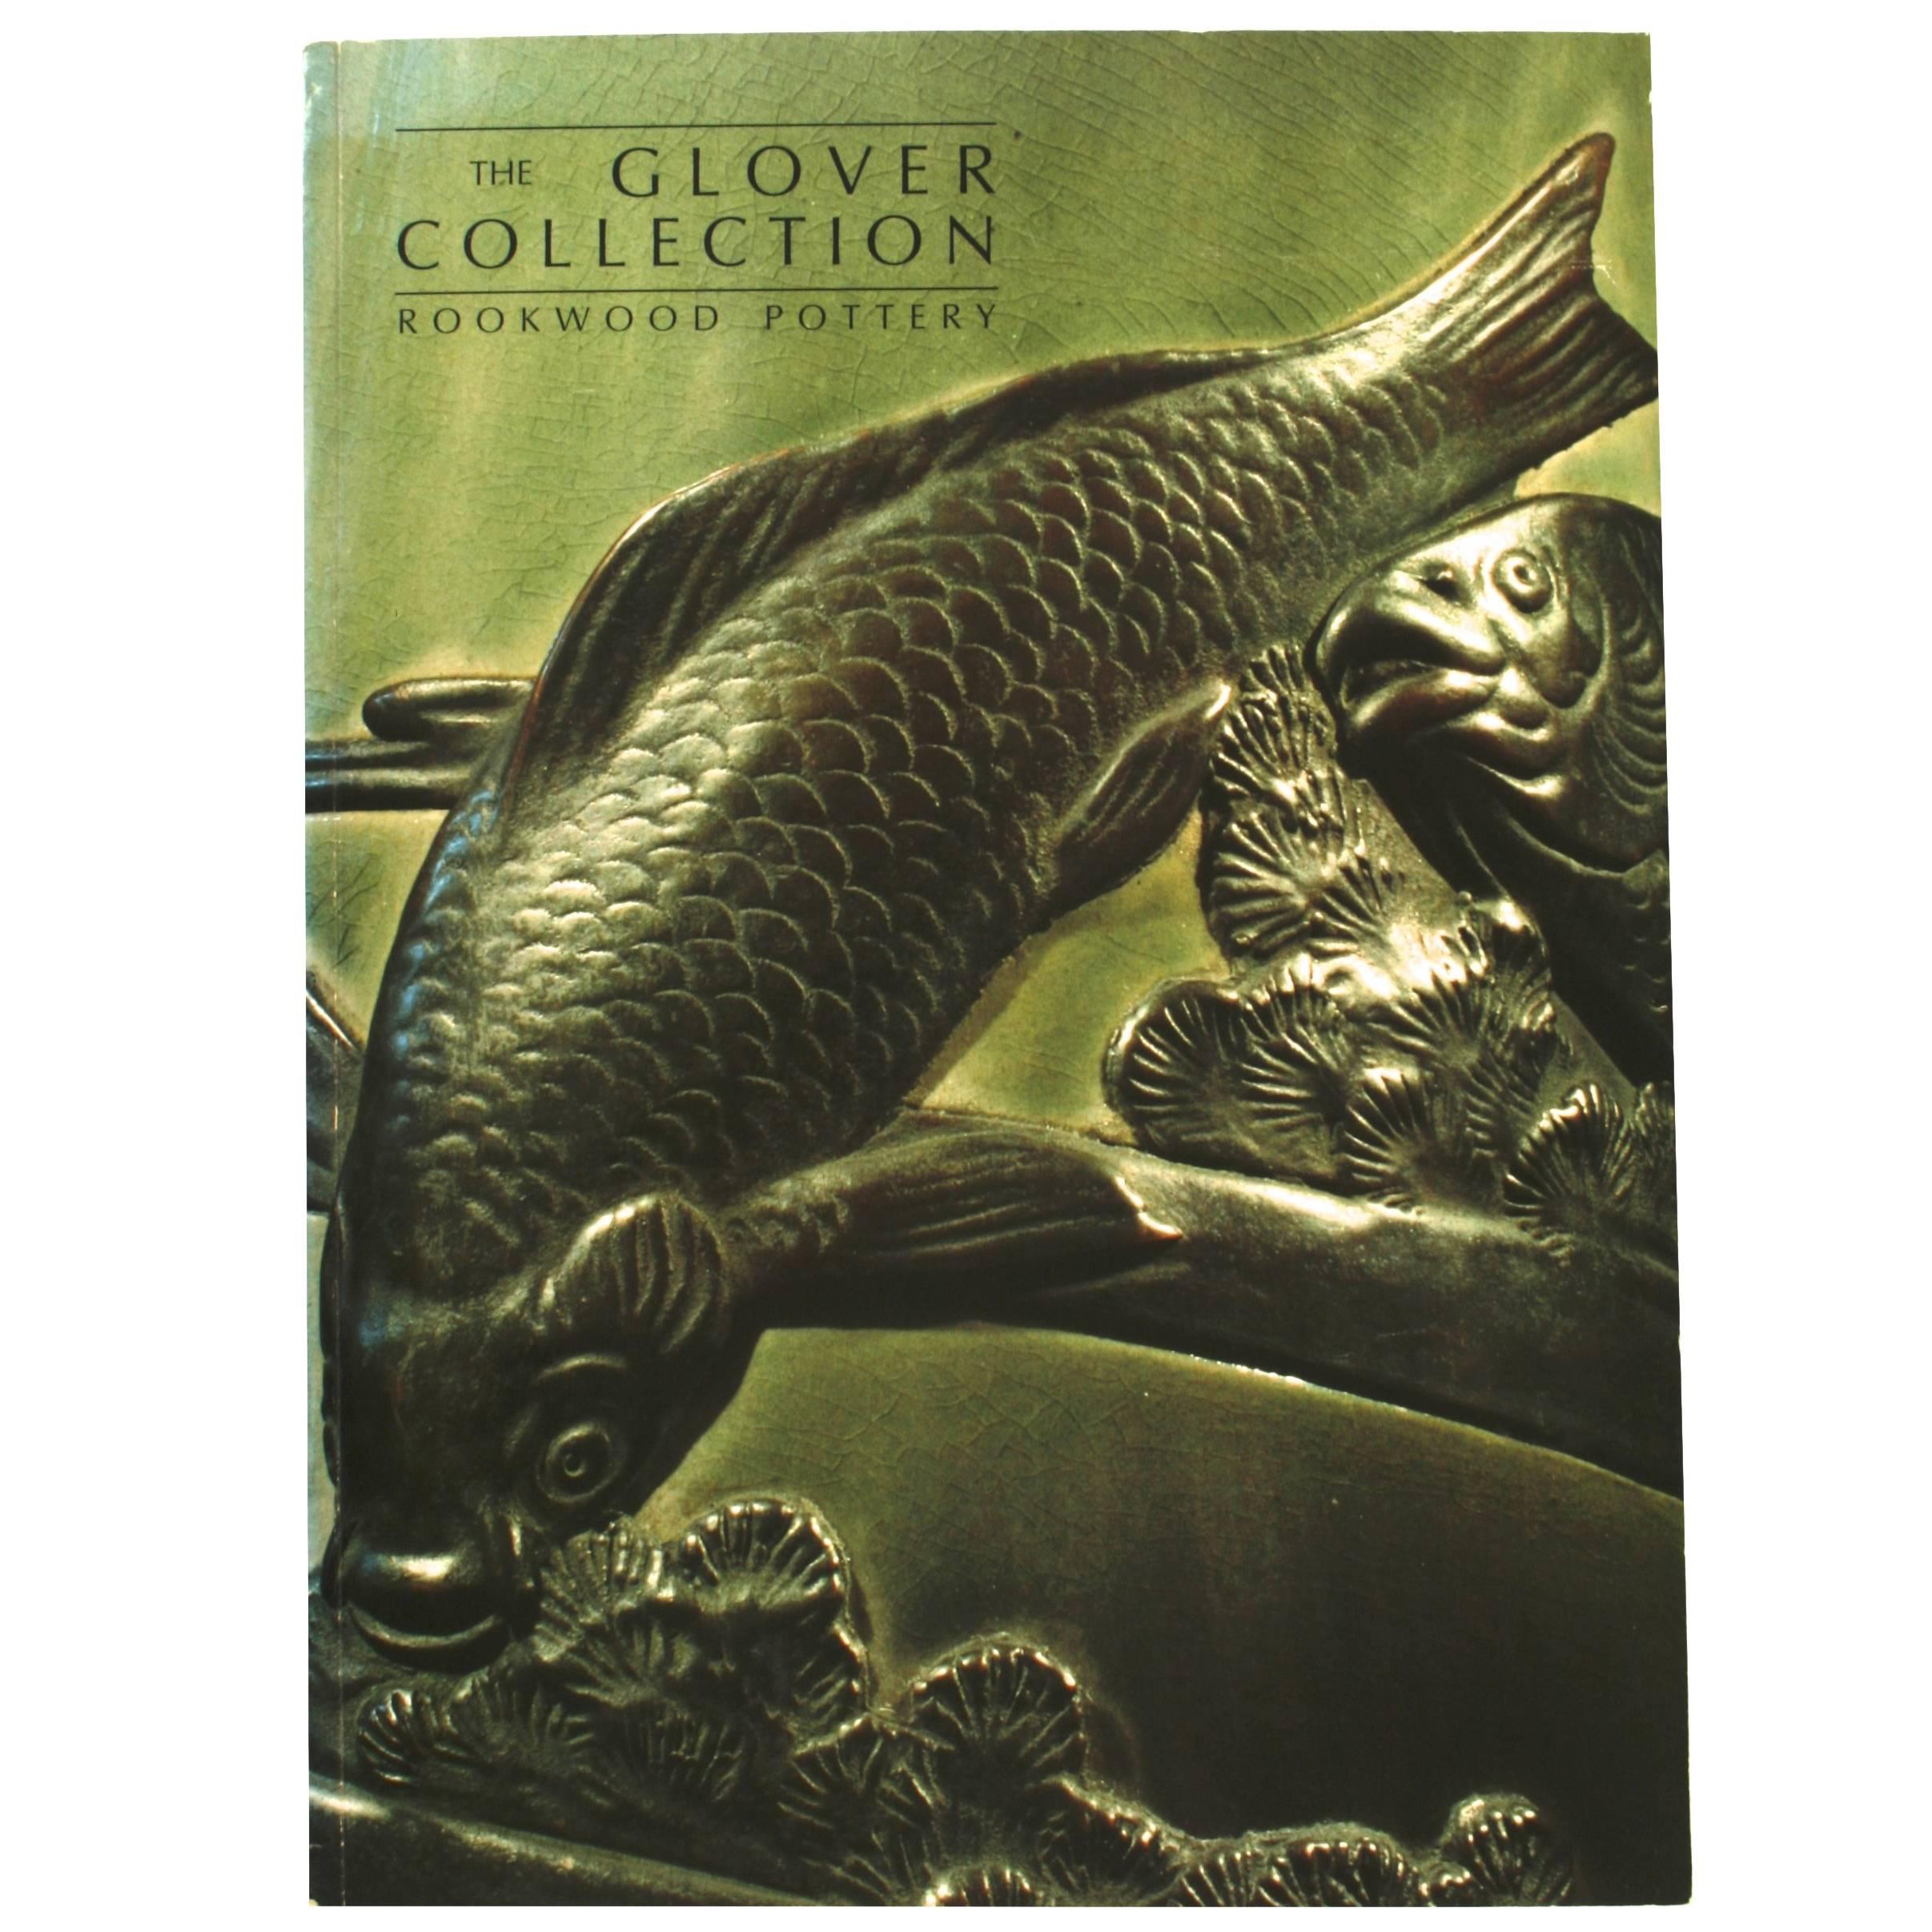 Glover Collection Rookwood Pottery by Cincinnati Art Galleries, 1st Ed For Sale